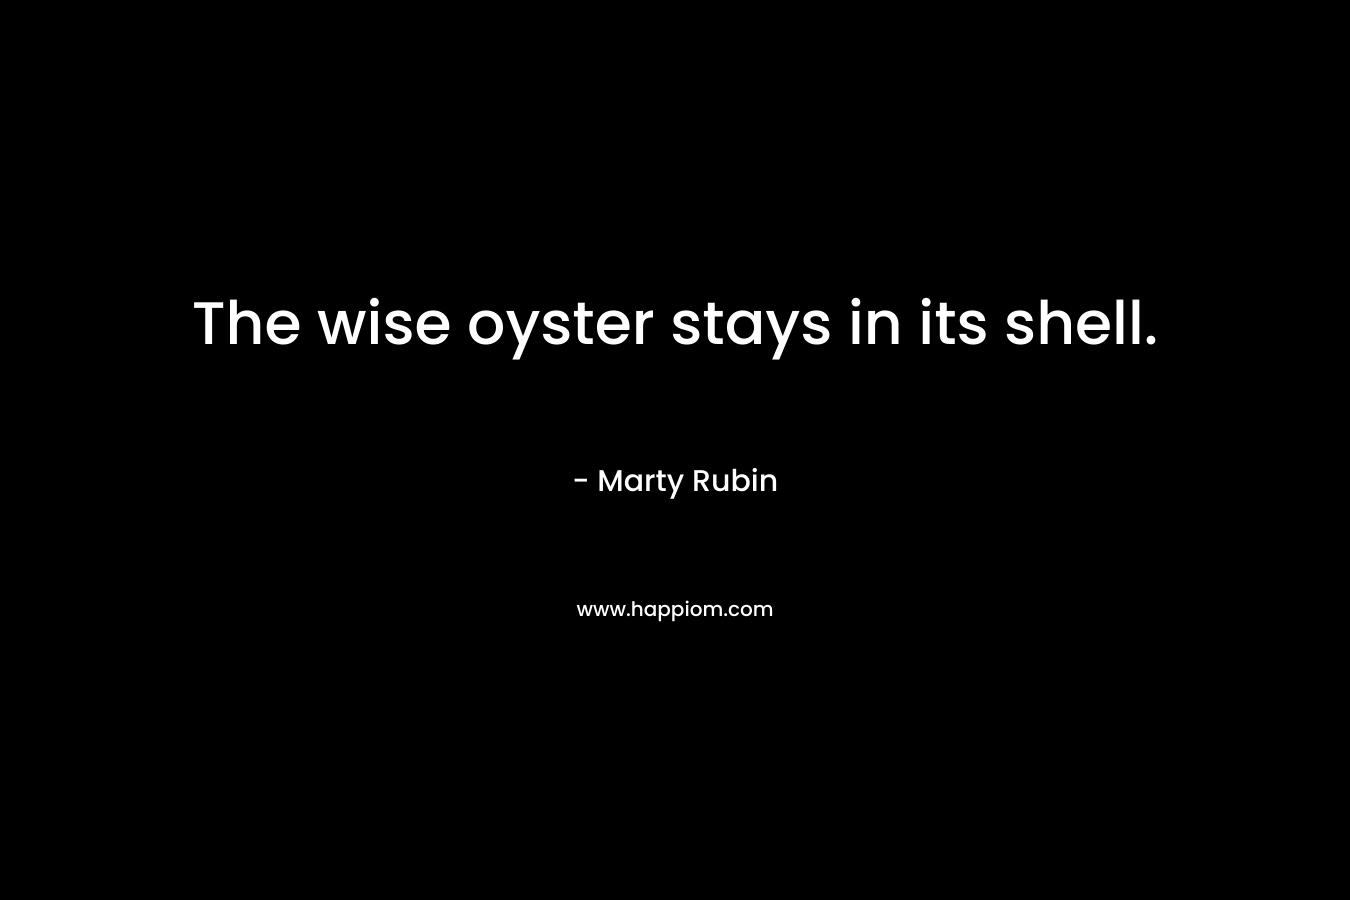 The wise oyster stays in its shell.